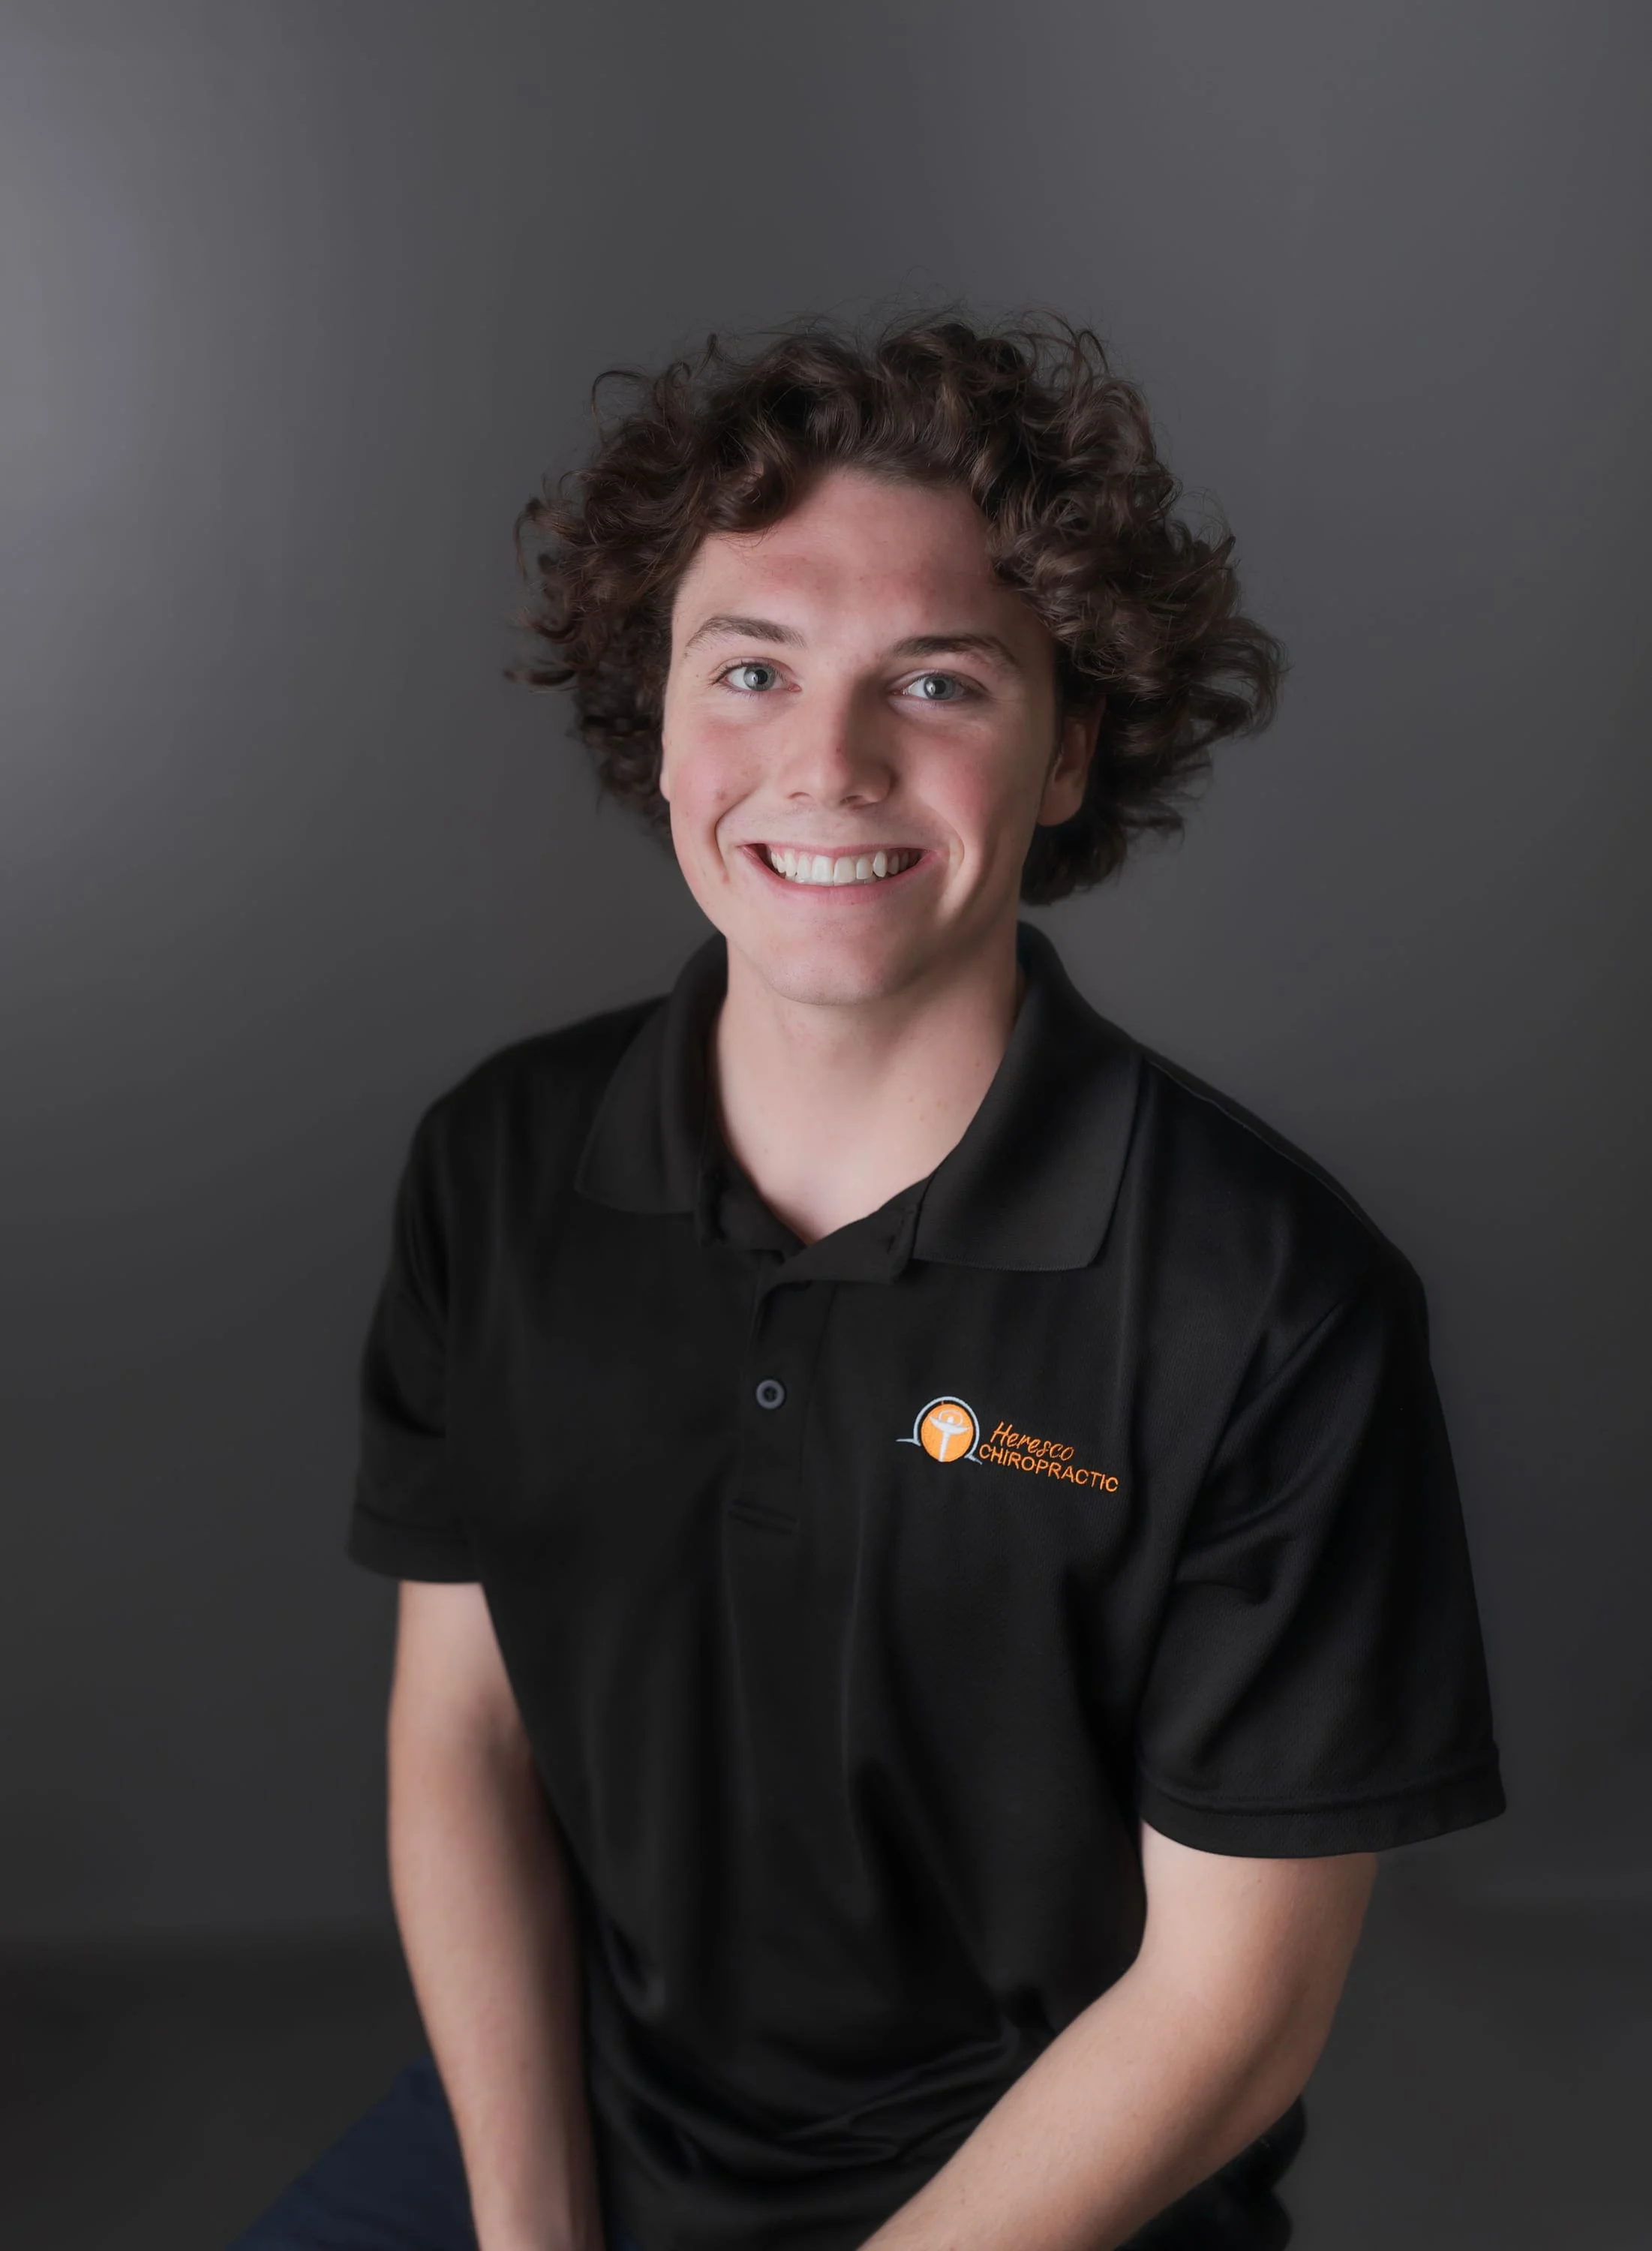 Photo of Boden a chiropractic assistant